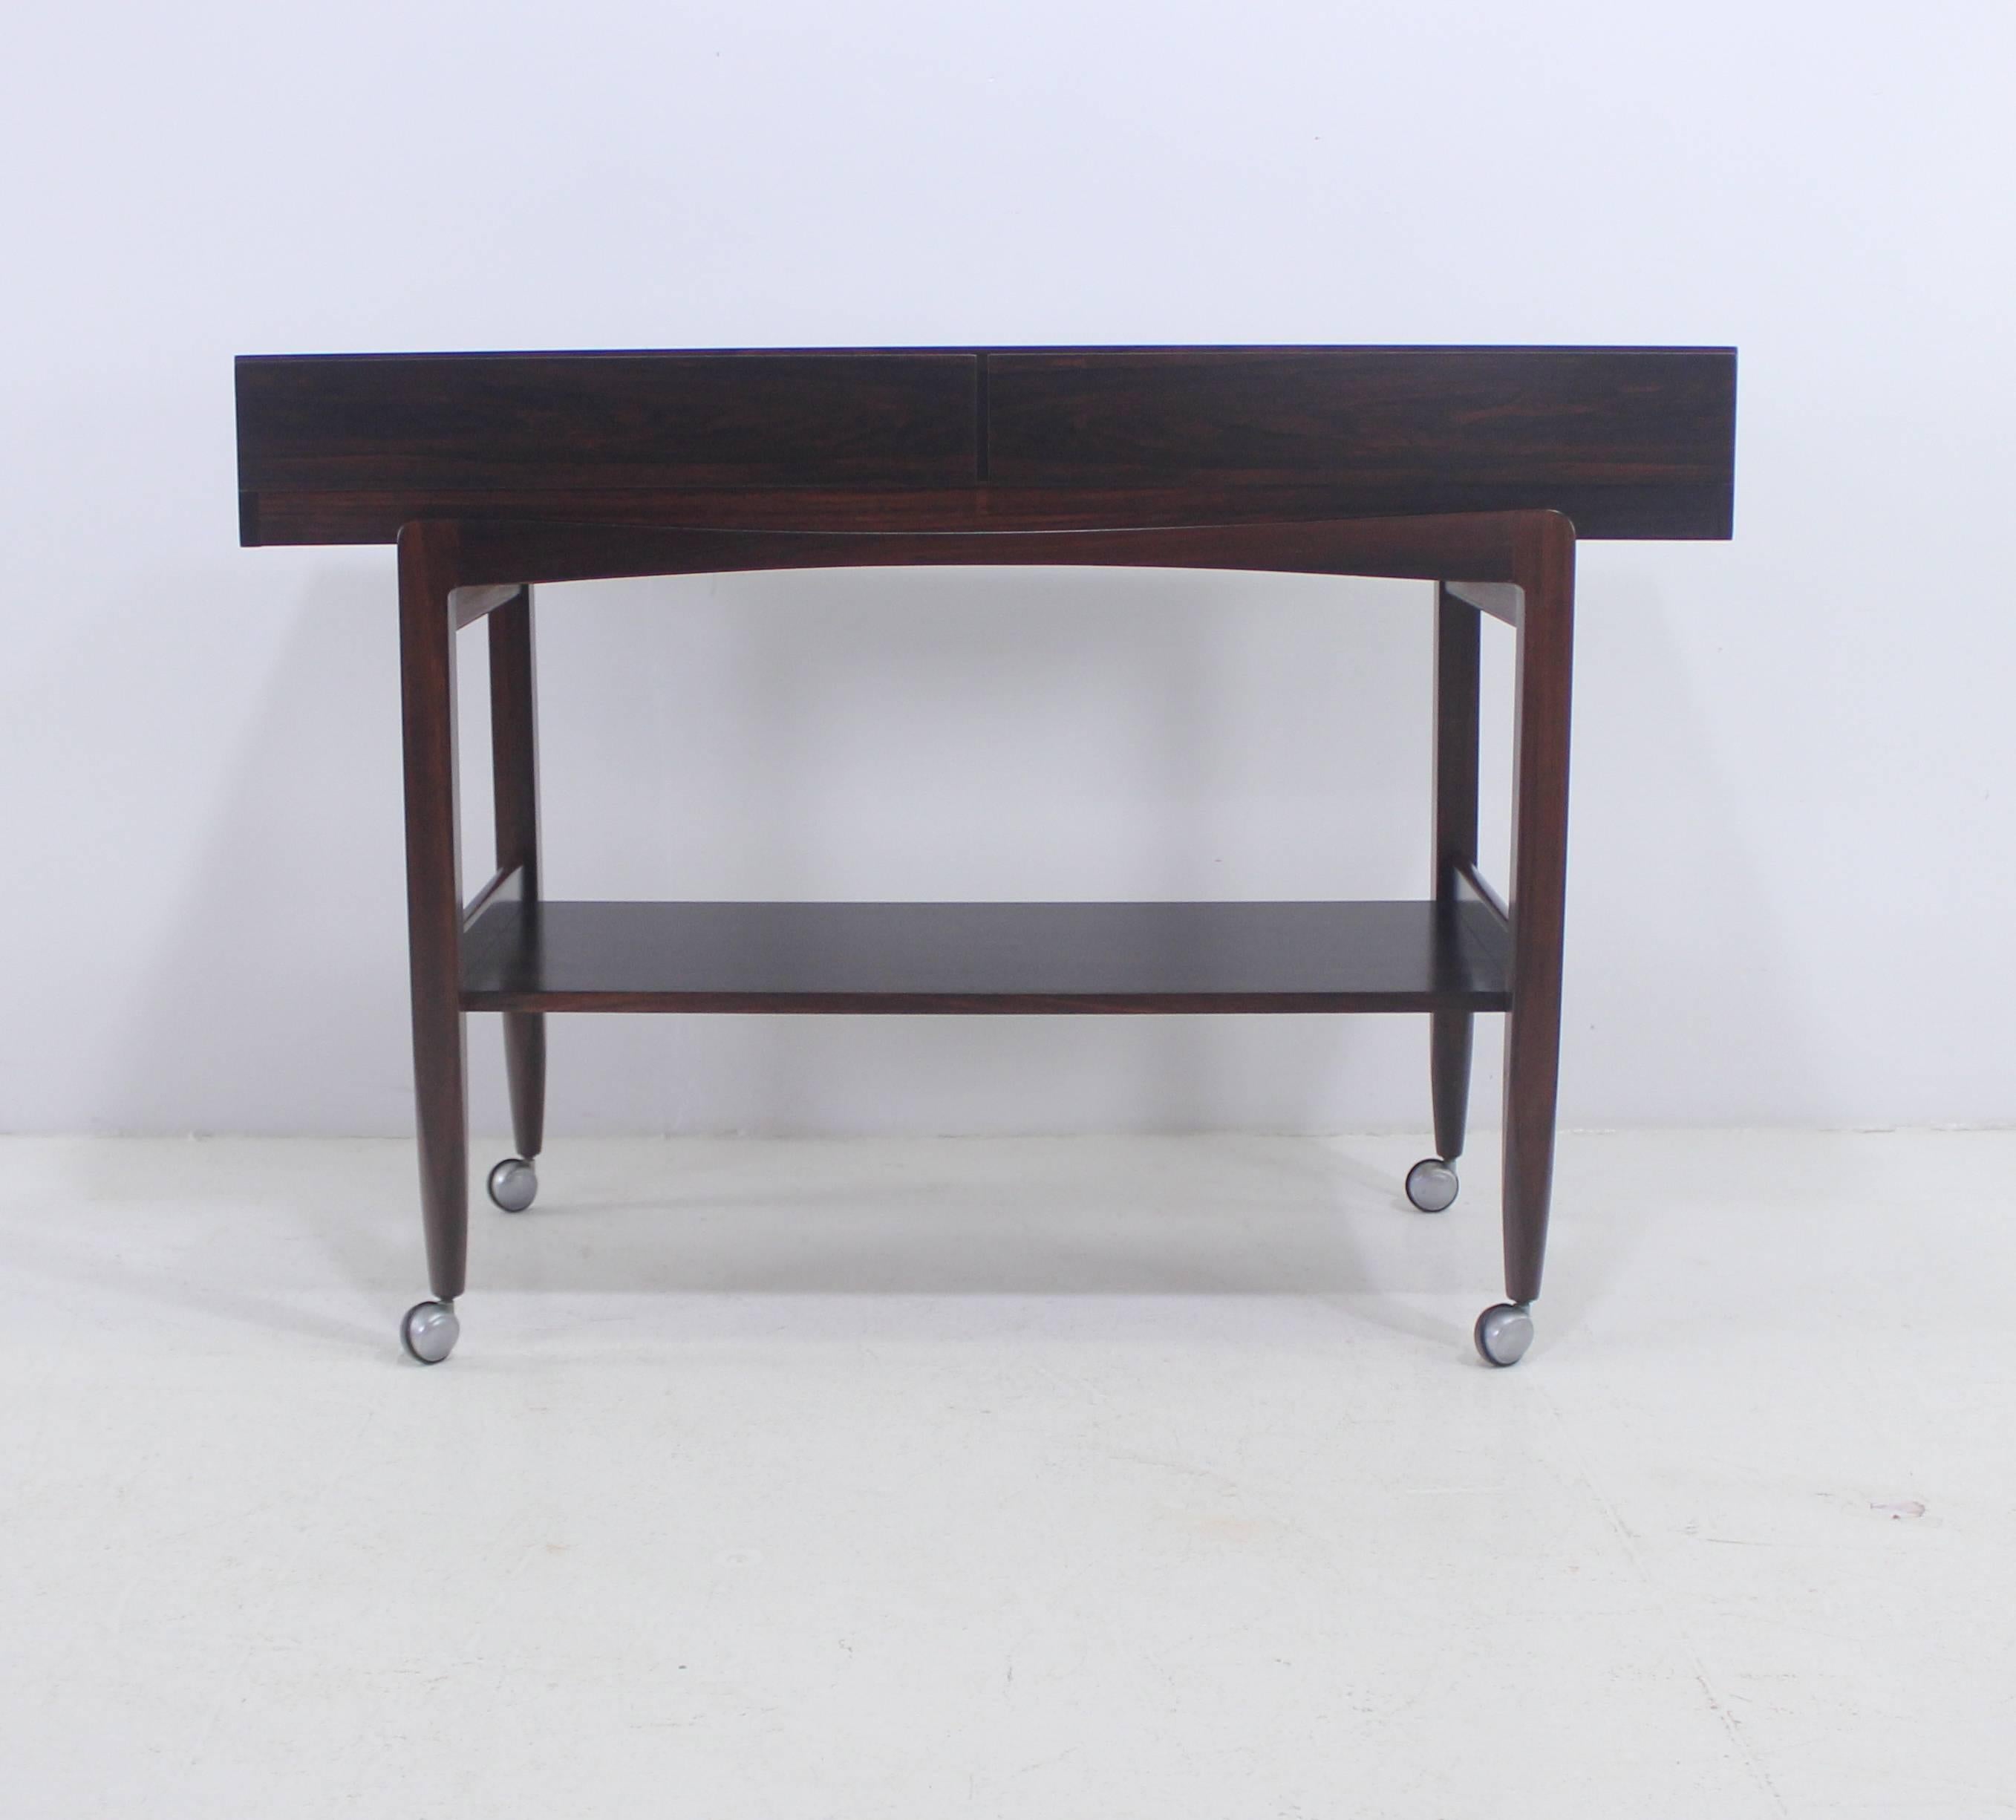 Rare Danish Modern Rosewood Console or Server Designed by Ib Kofod Larsen In Excellent Condition For Sale In Portland, OR